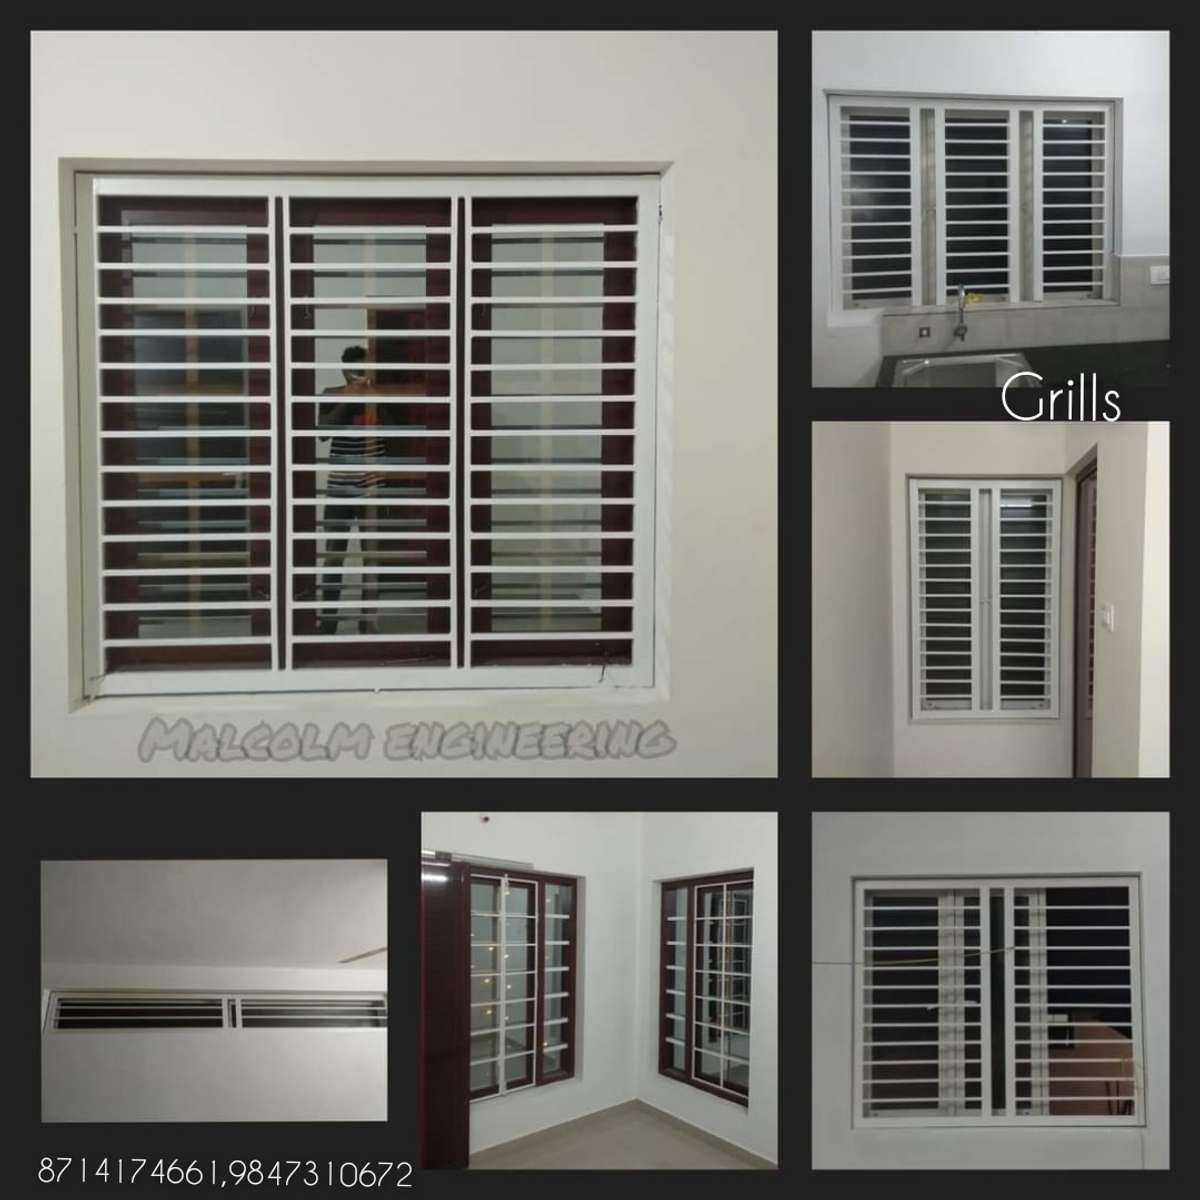 Designs by Contractor Clinton Symeanthy, Ernakulam | Kolo